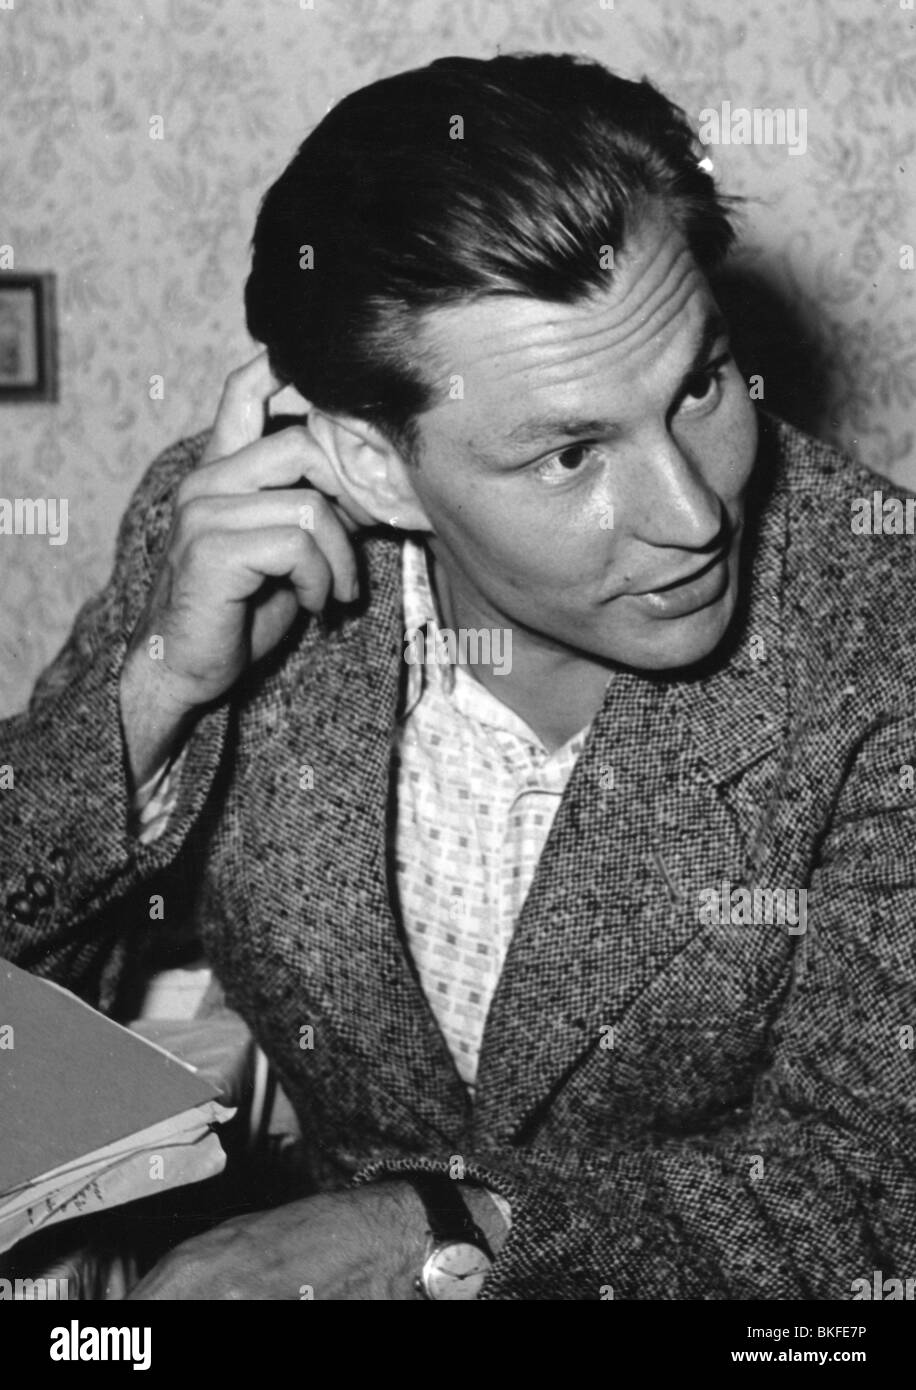 geography / travel, Germany, politics, 1950s, Bund der Kriegsdienstverweigerer (League of Conscientious Objectors), member with the sign of the league at the lapel of his jacket, 1951, Stock Photo